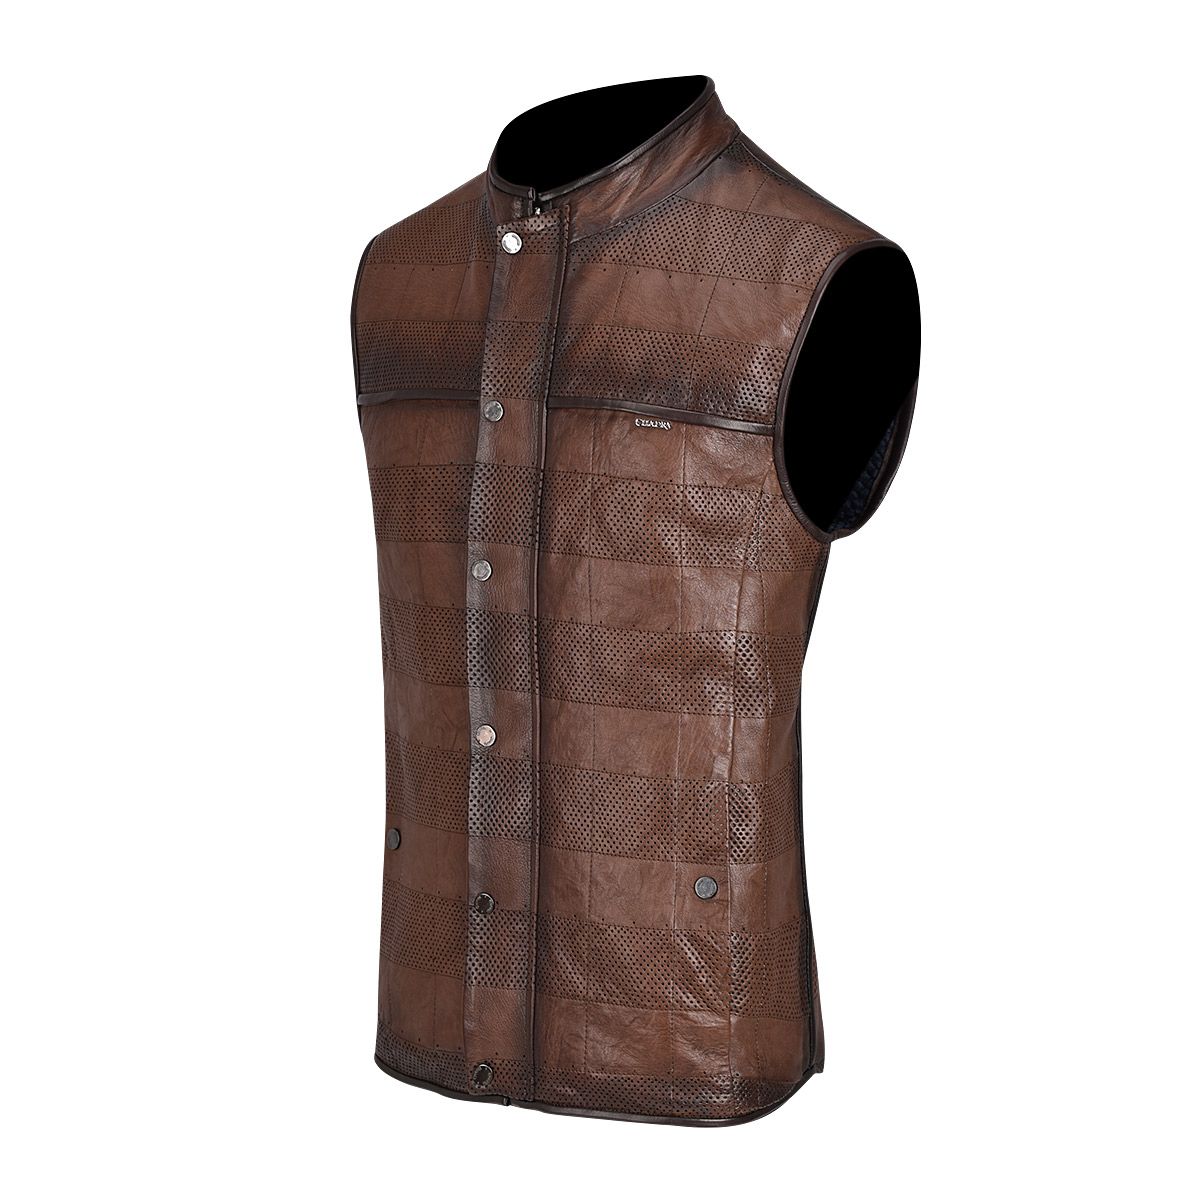 H303COC - Cuadra brown casual fashion reversible lambskin leather vest for men-Kuet.us